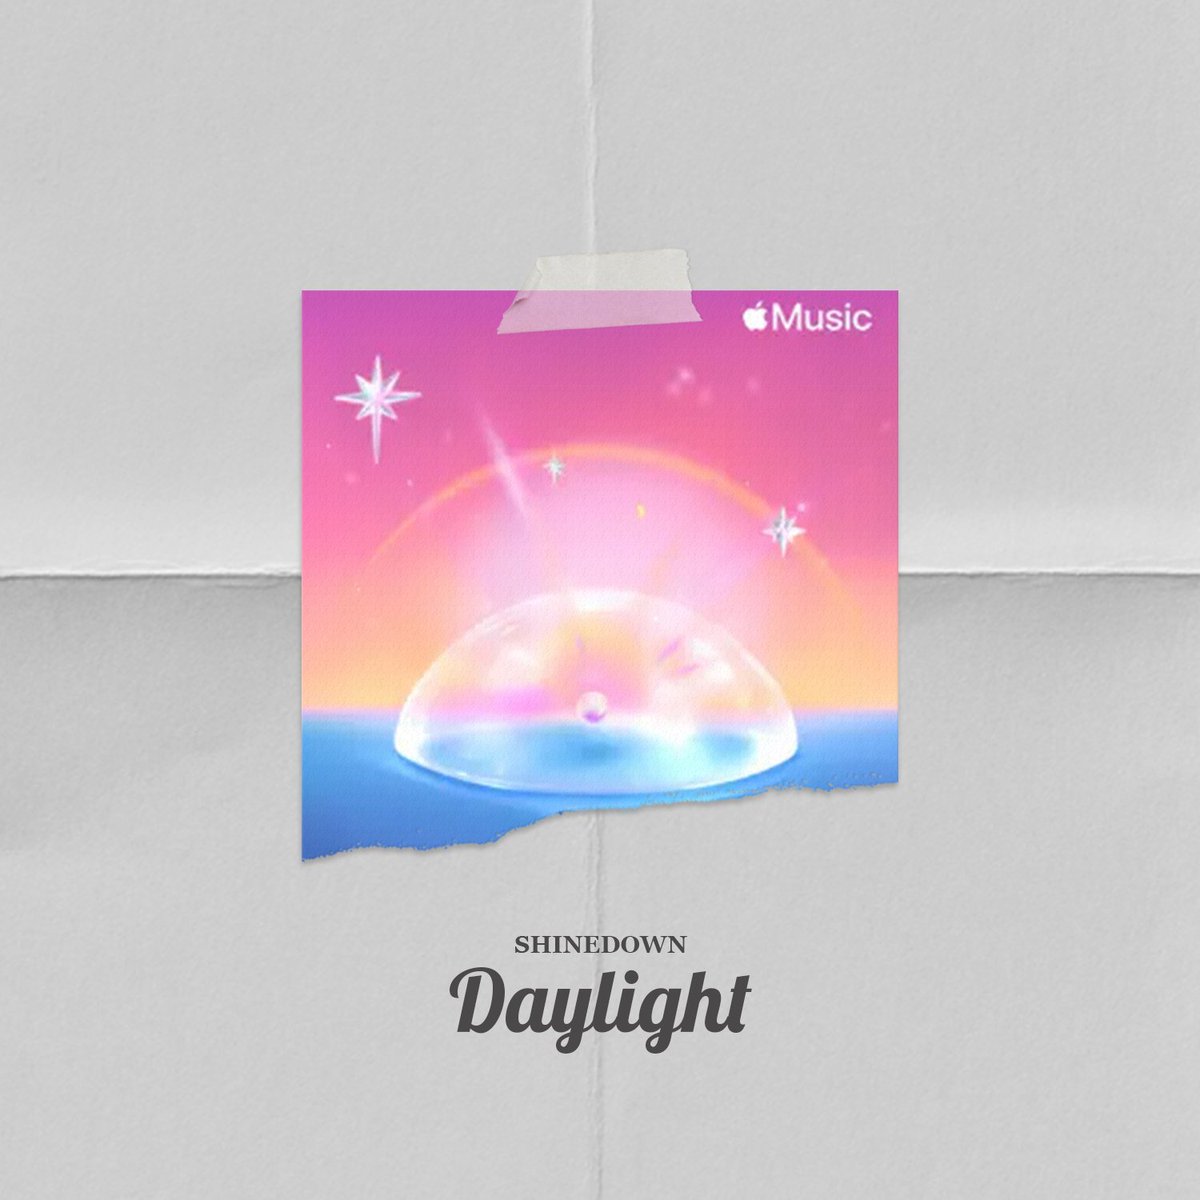 What goes well with sweater weather you ask? A #WinterWarmers playlist by @AppleMusic and it features 'Daylight!' 🎧 Listen now: music.apple.com/us/playlist/wi…